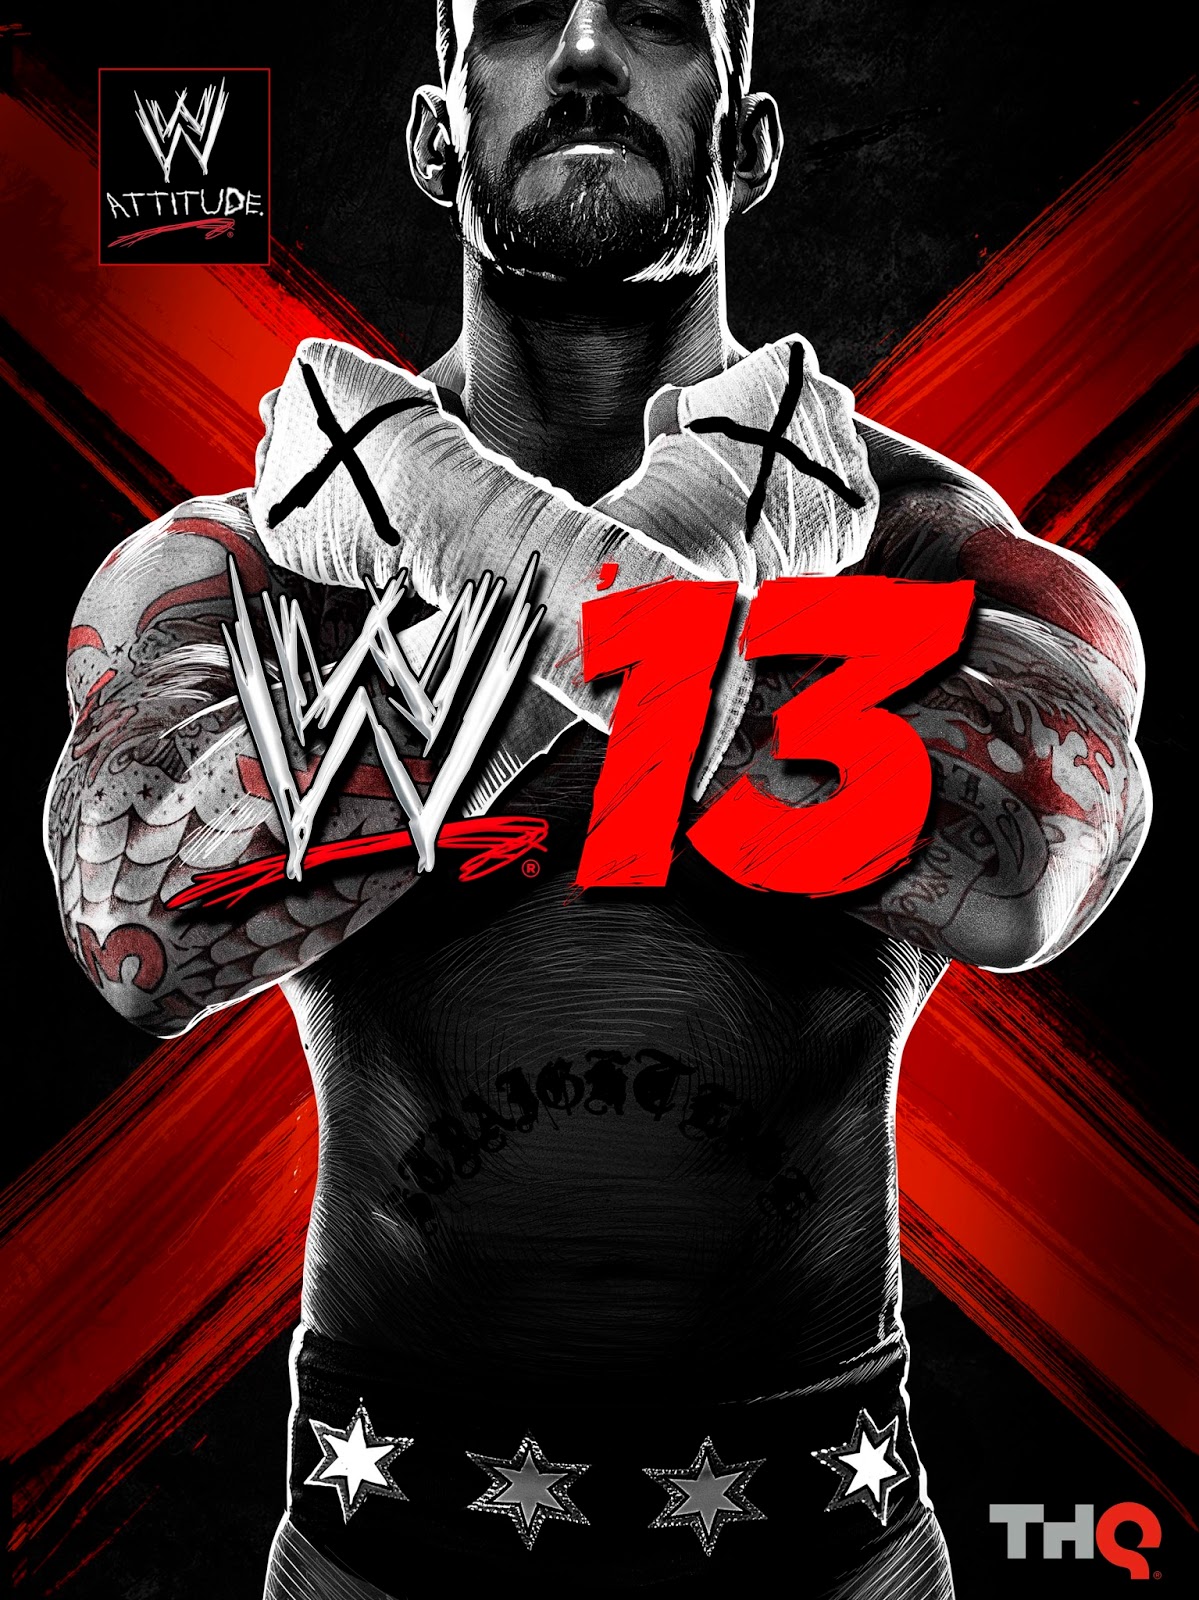 download wwe 13 wii iso for dolphin emulator highly compressed